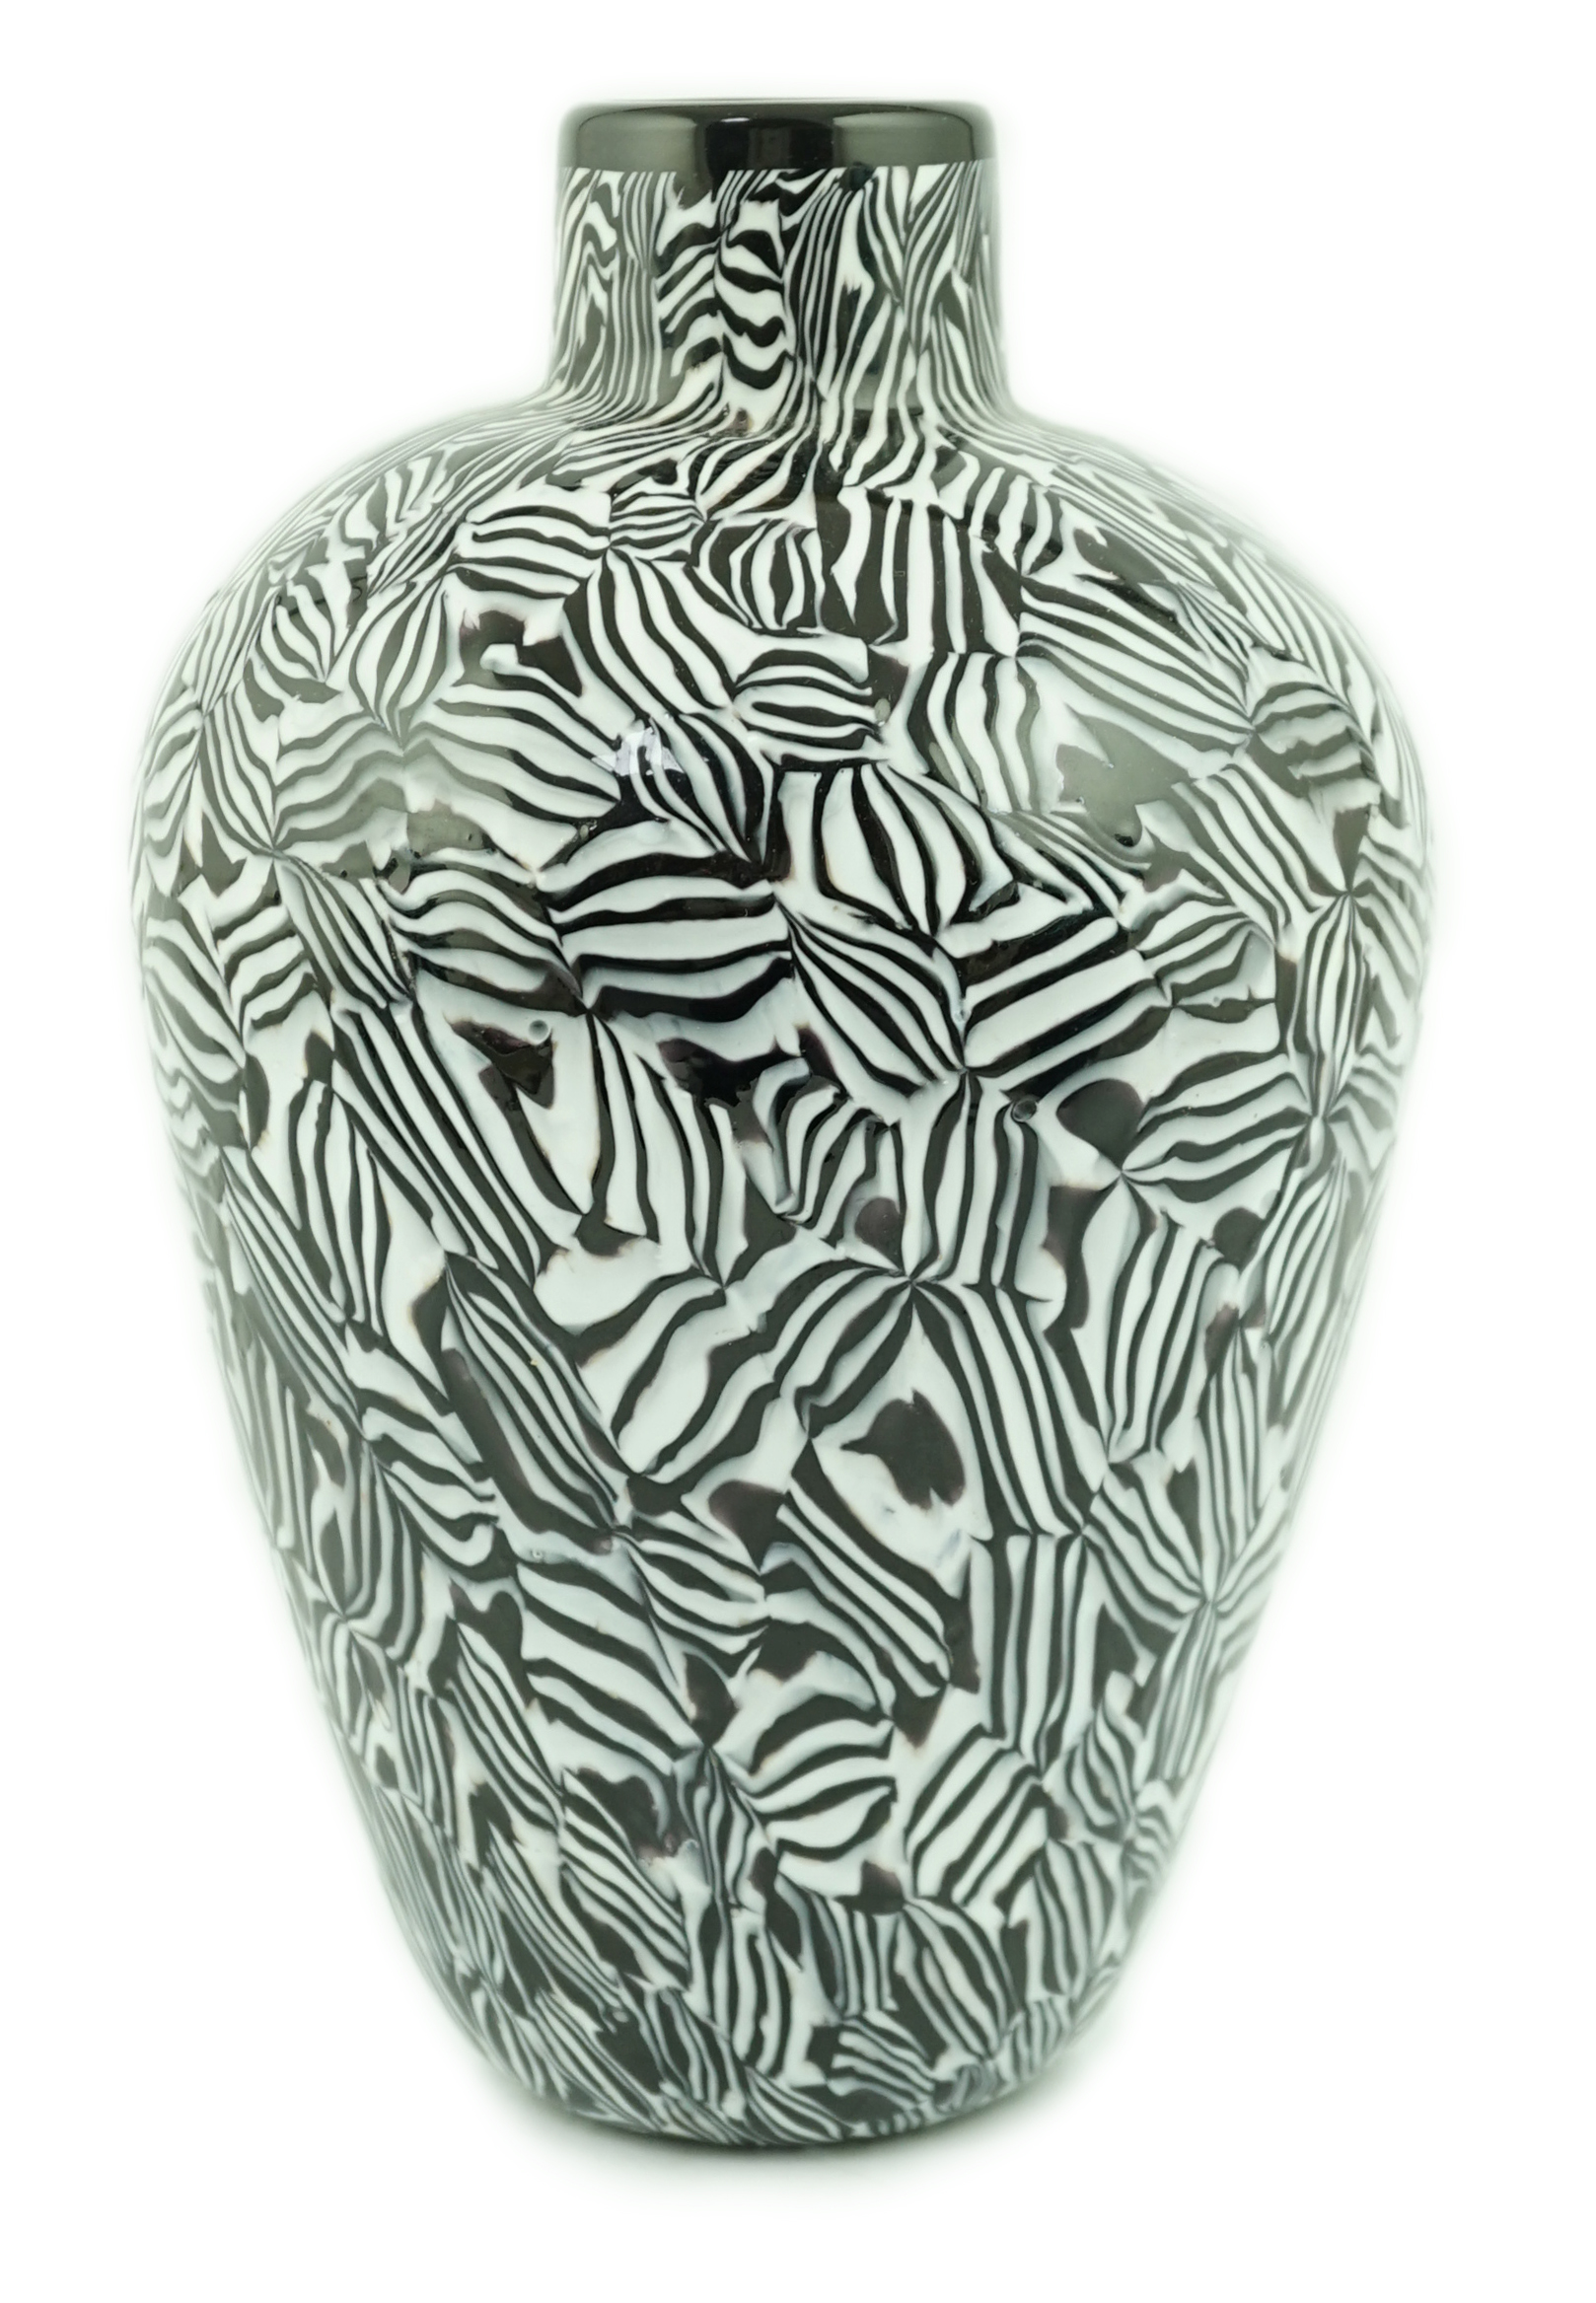 Vittorio Ferro (1932-2012) A Murano glass Murrine vase, in black and white, unsigned, 25cm, Please note this lot attracts an additional import tax of 20% on the hammer price